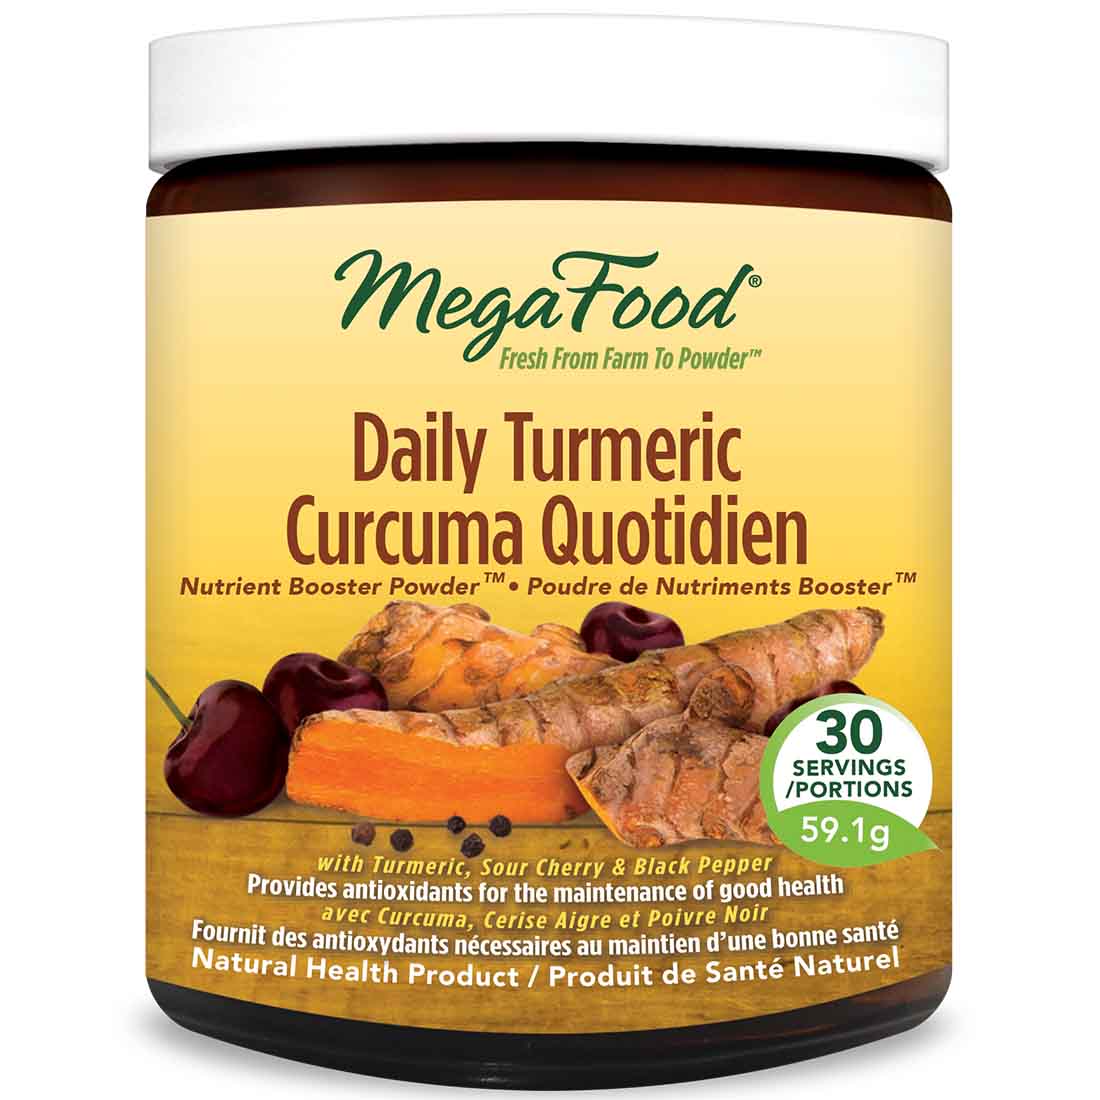 MegaFood Daily Turmeric Nutrient Booster, 59.1g